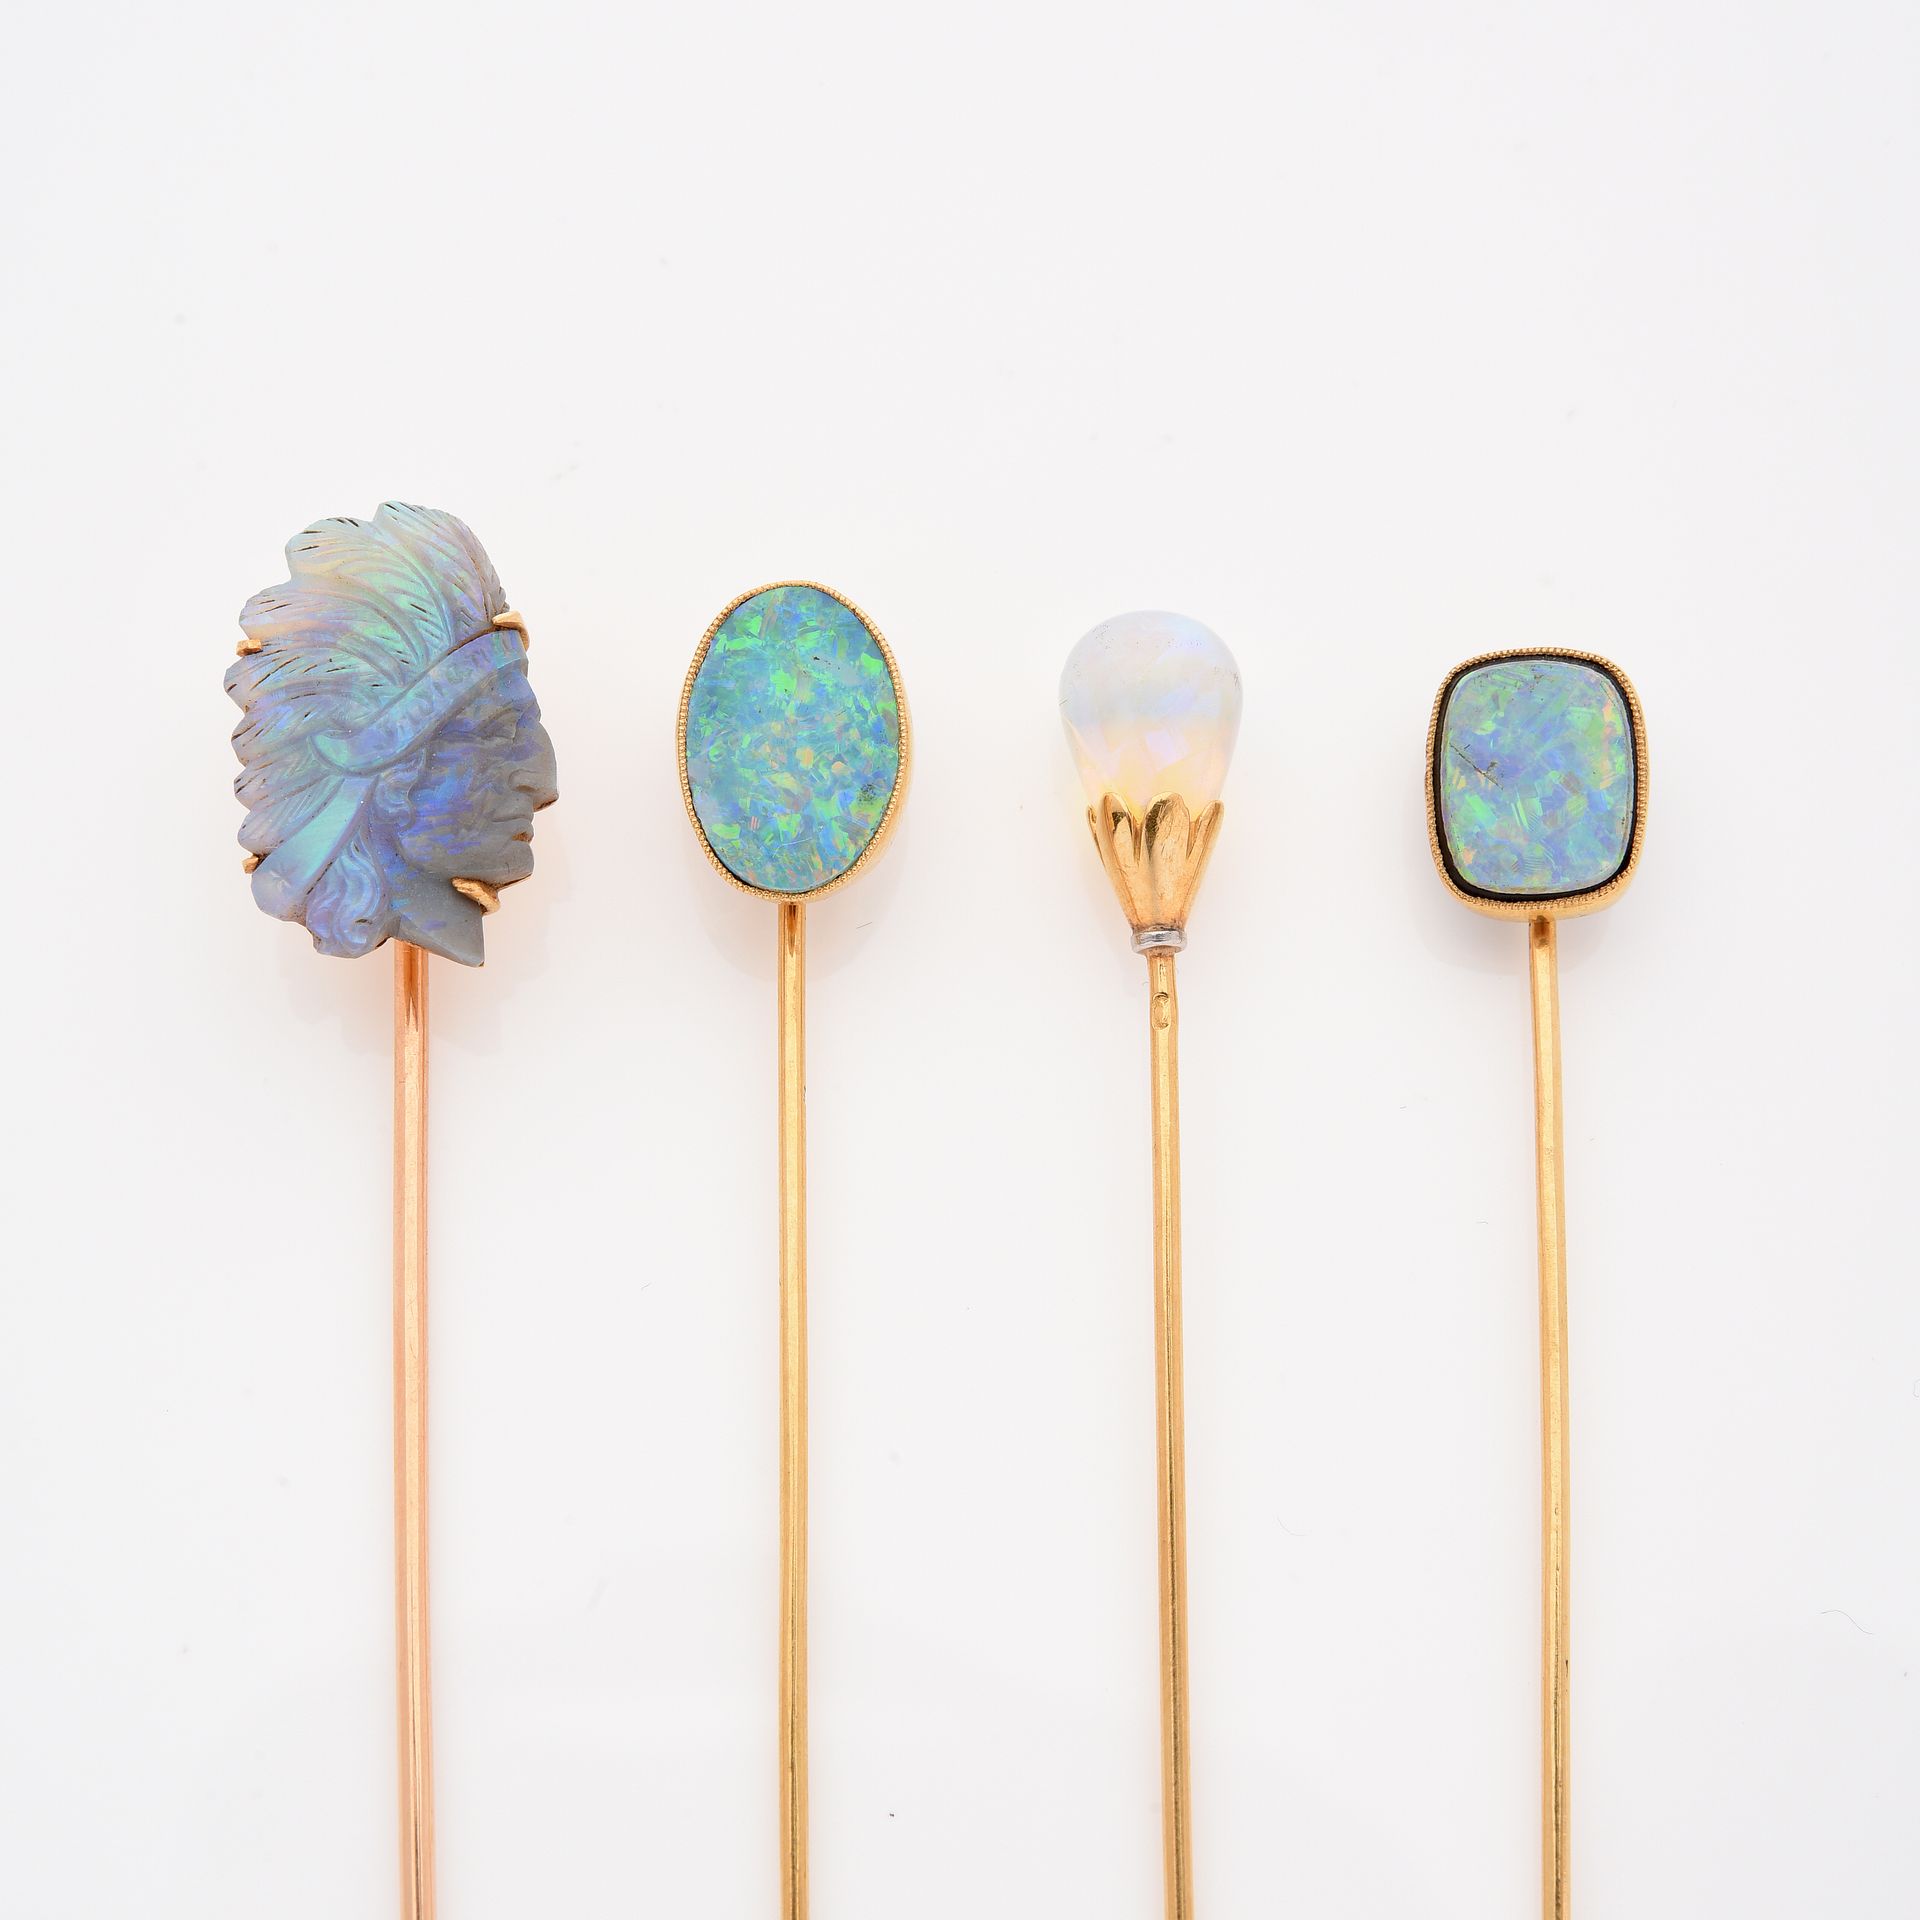 Null SET OF 4 TIE PINS :

- One in head of Indian chief of carved opal and yello&hellip;